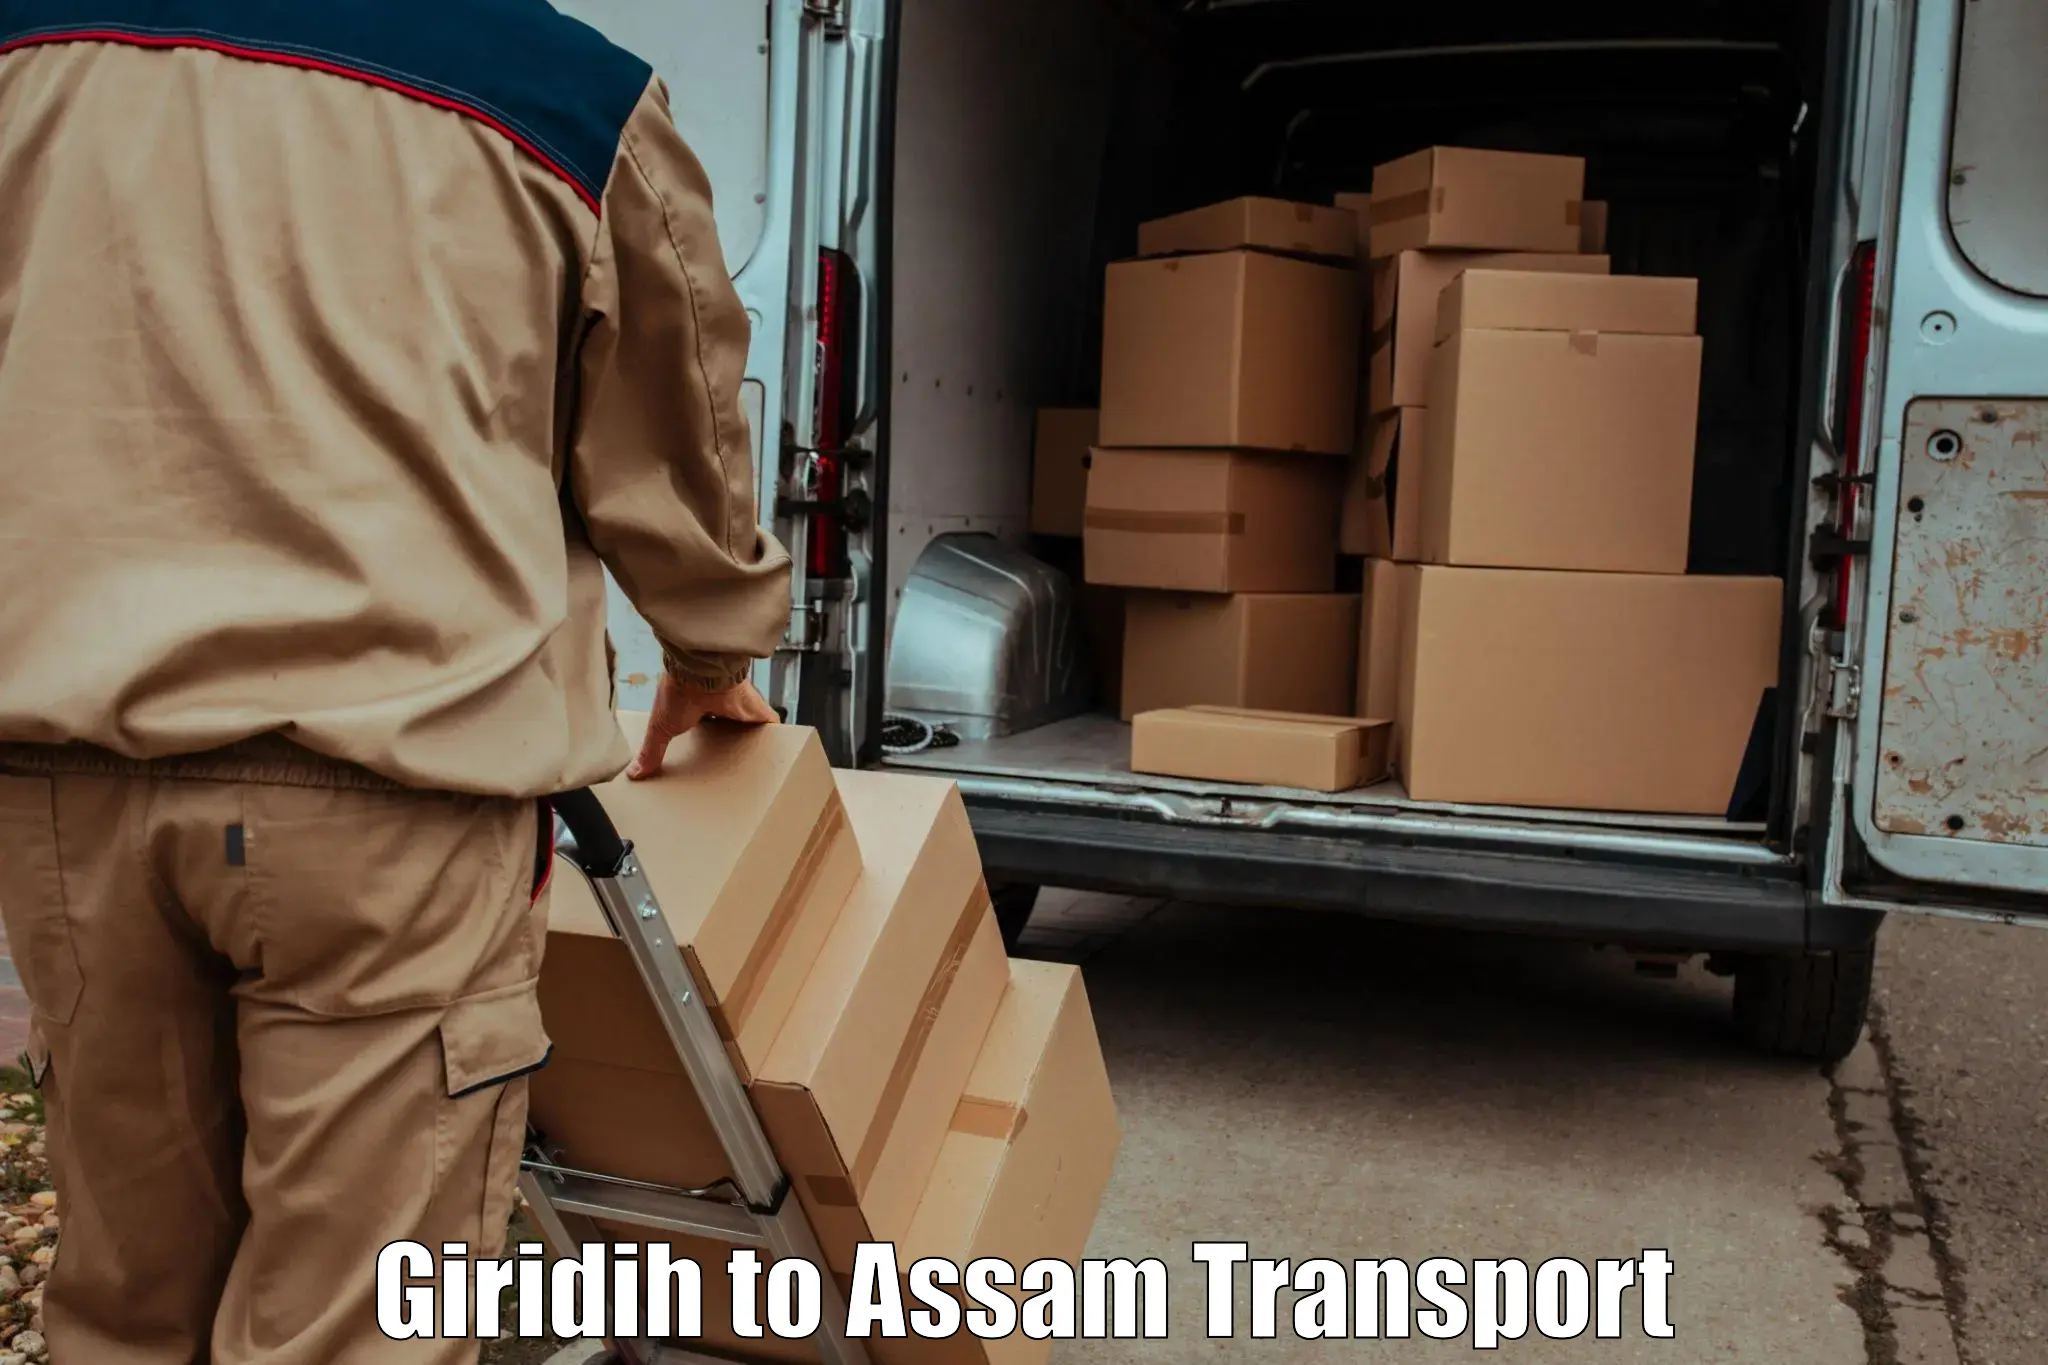 Container transport service Giridih to Tezpur